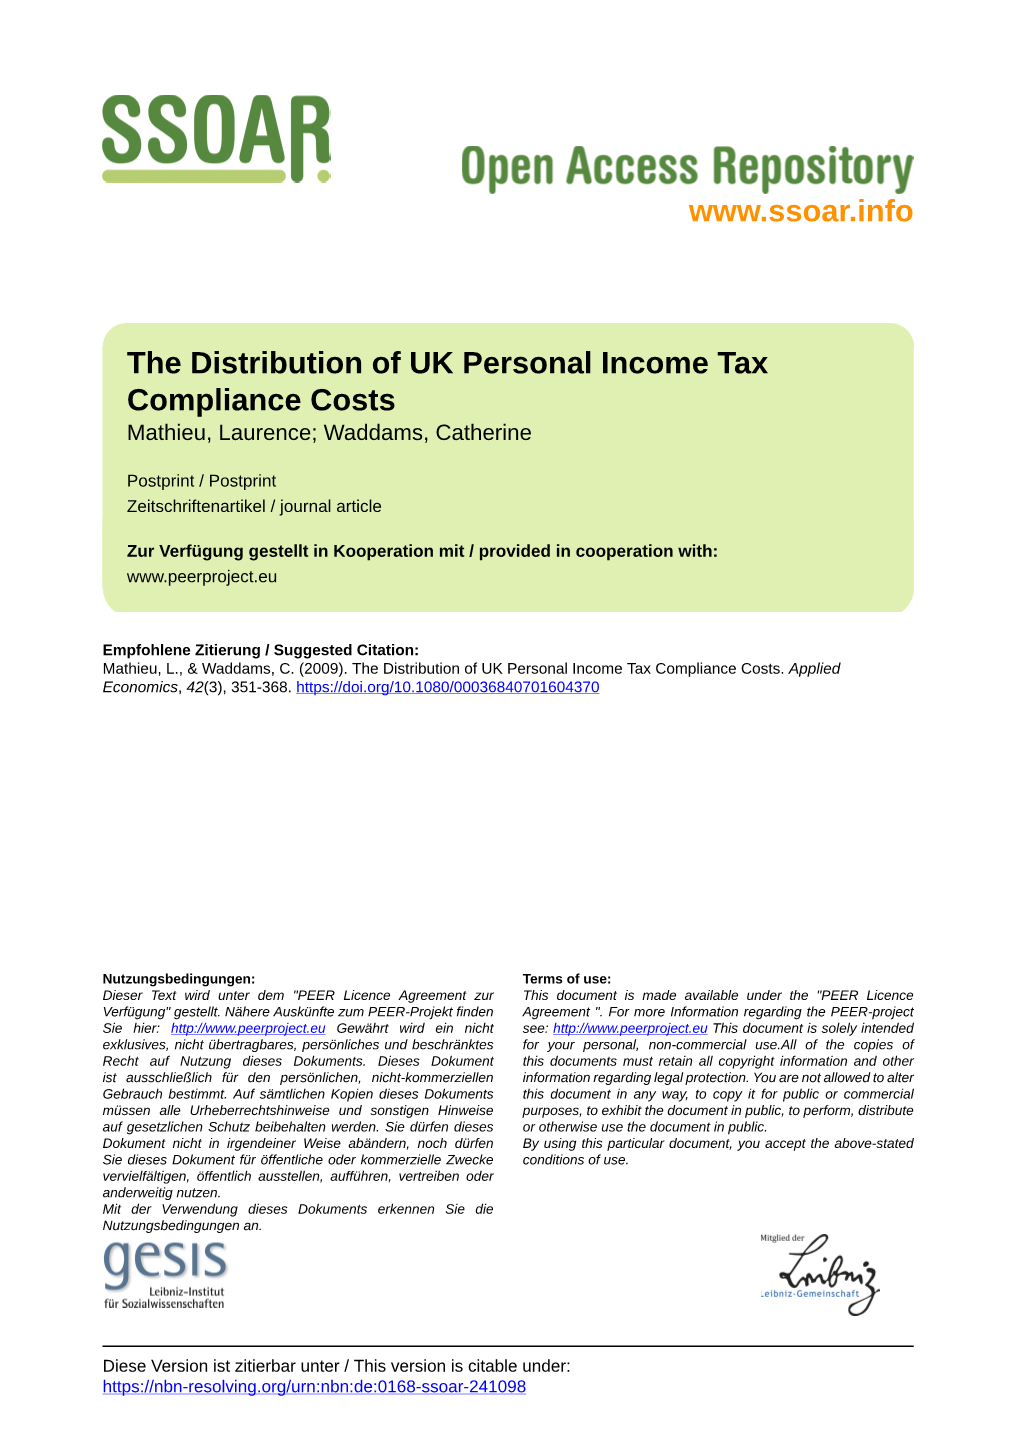 The Distribution of UK Personal Income Tax Compliance Costs Mathieu, Laurence; Waddams, Catherine